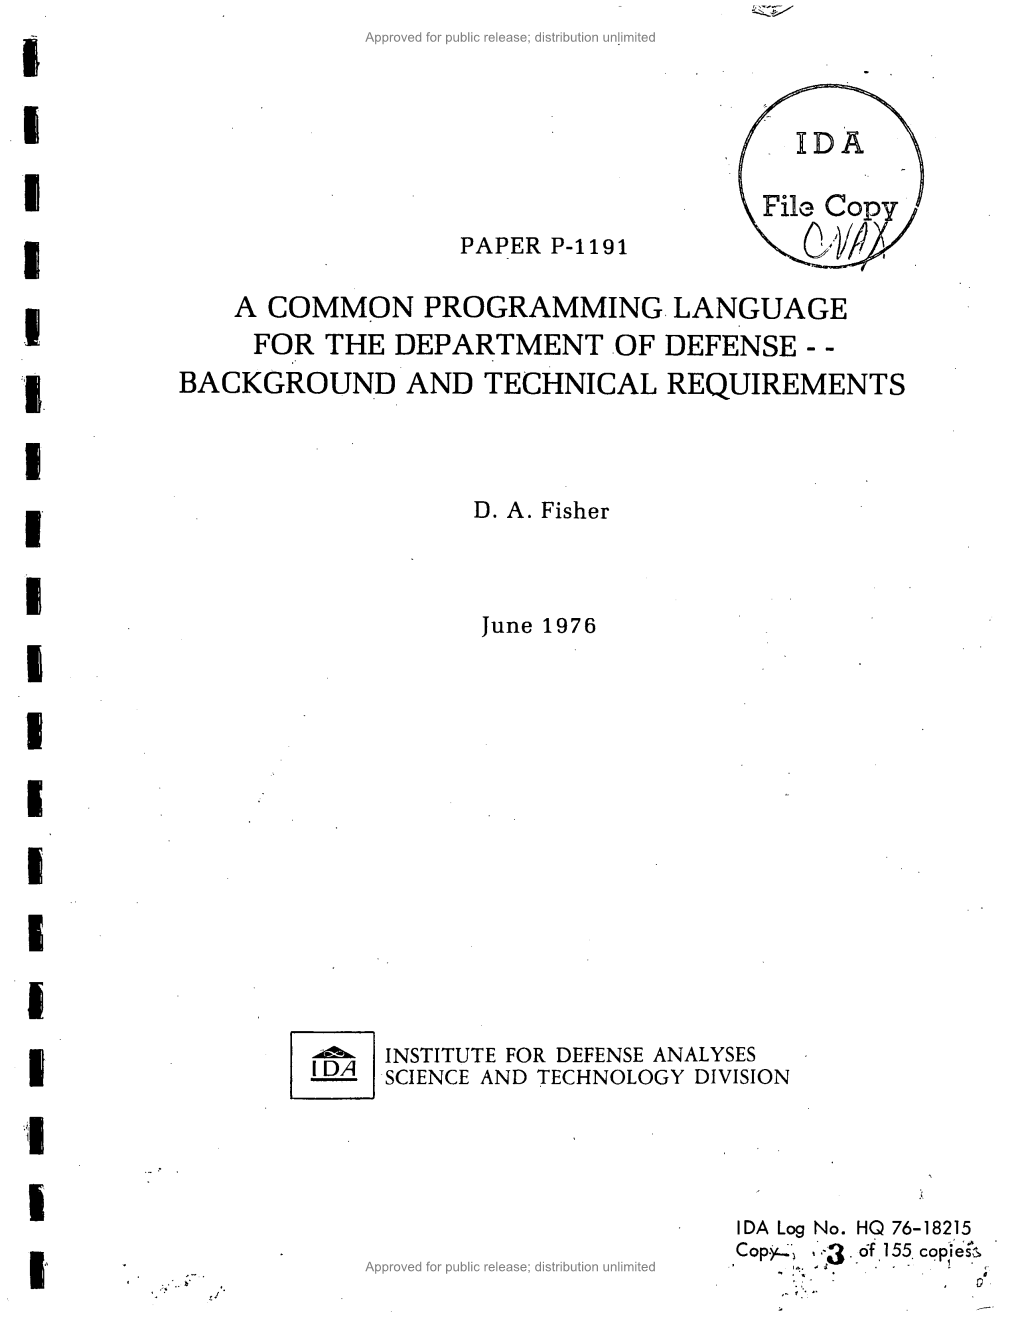 A Common Programming Language for the Depart Final Ment of Defenses-Background and Technical January -December 1975 1 Requirements «